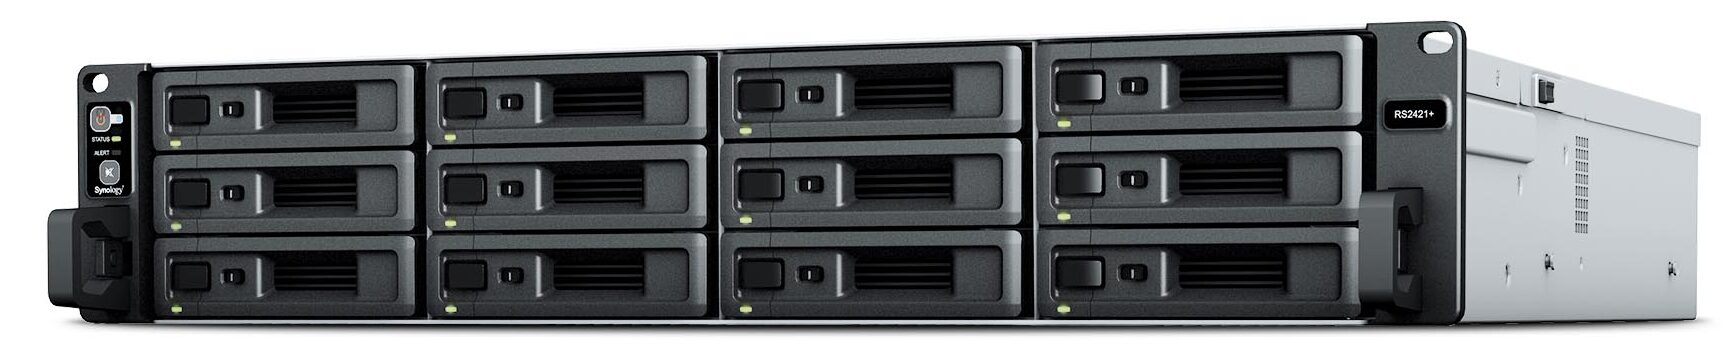 Le nuove RackStation RS2421+ e RS2421RP+ di Synology